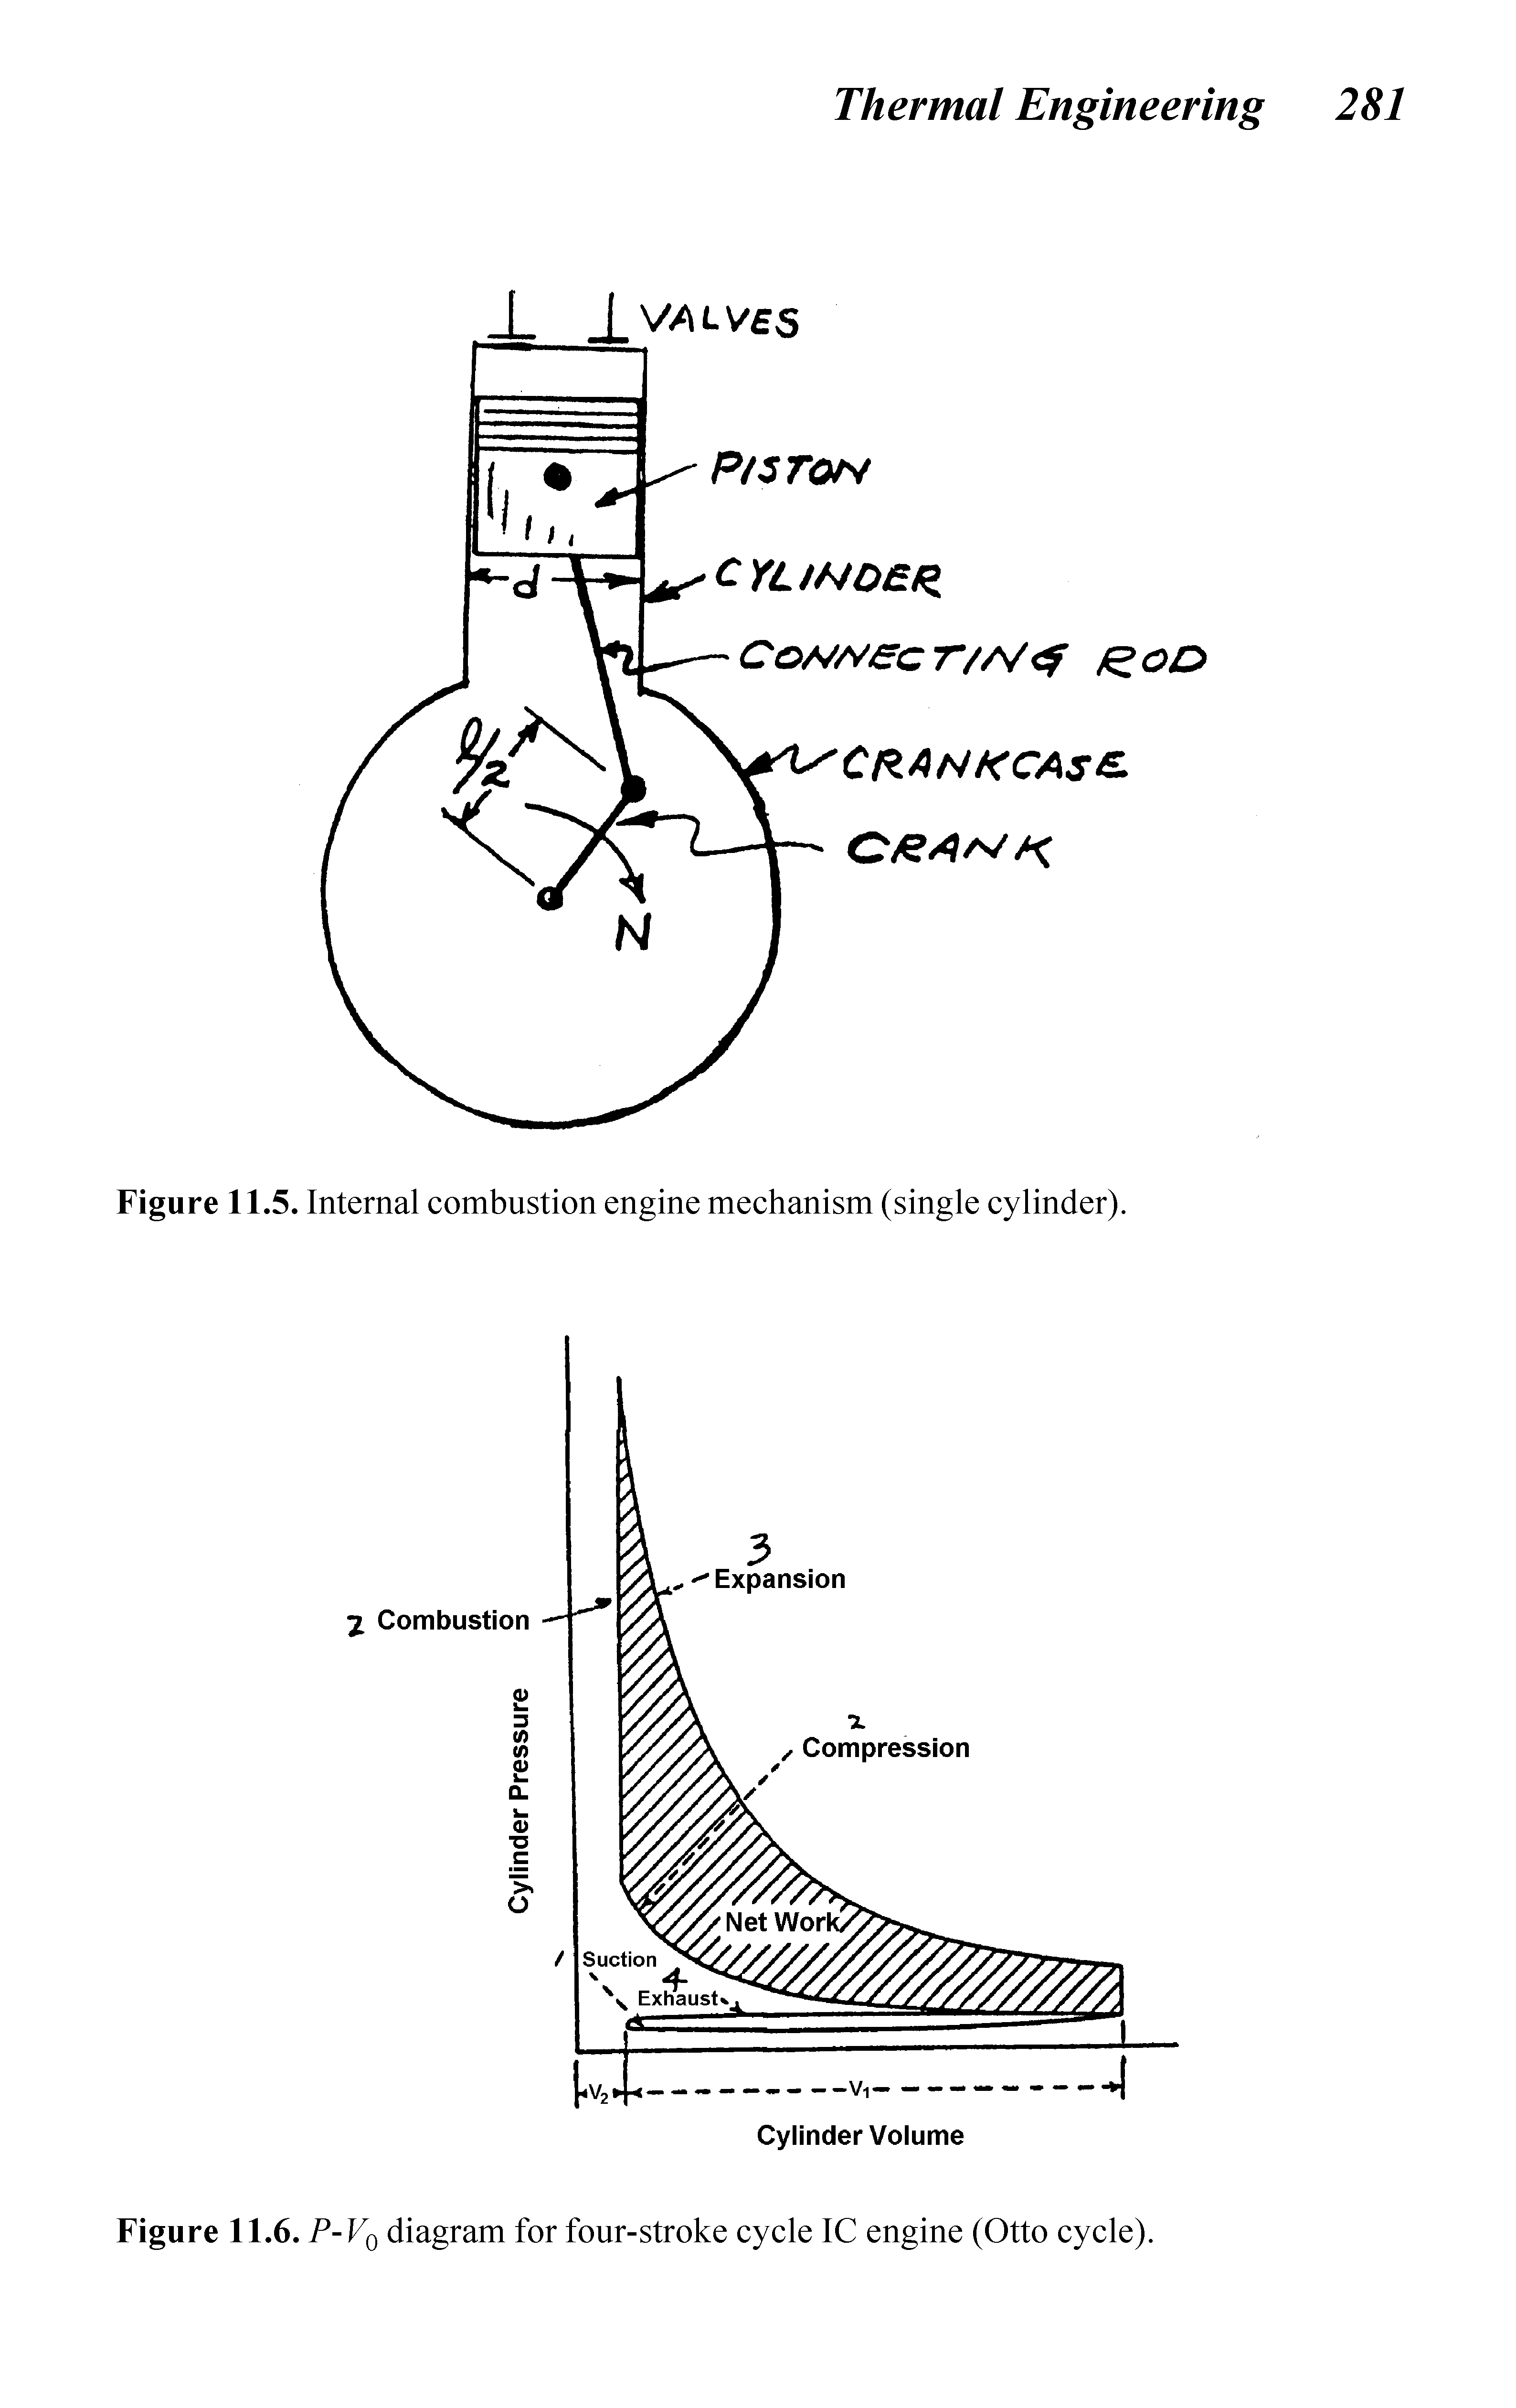 Figure 11.6. P-Vq diagram for four-stroke cycle IC engine (Otto cycle).